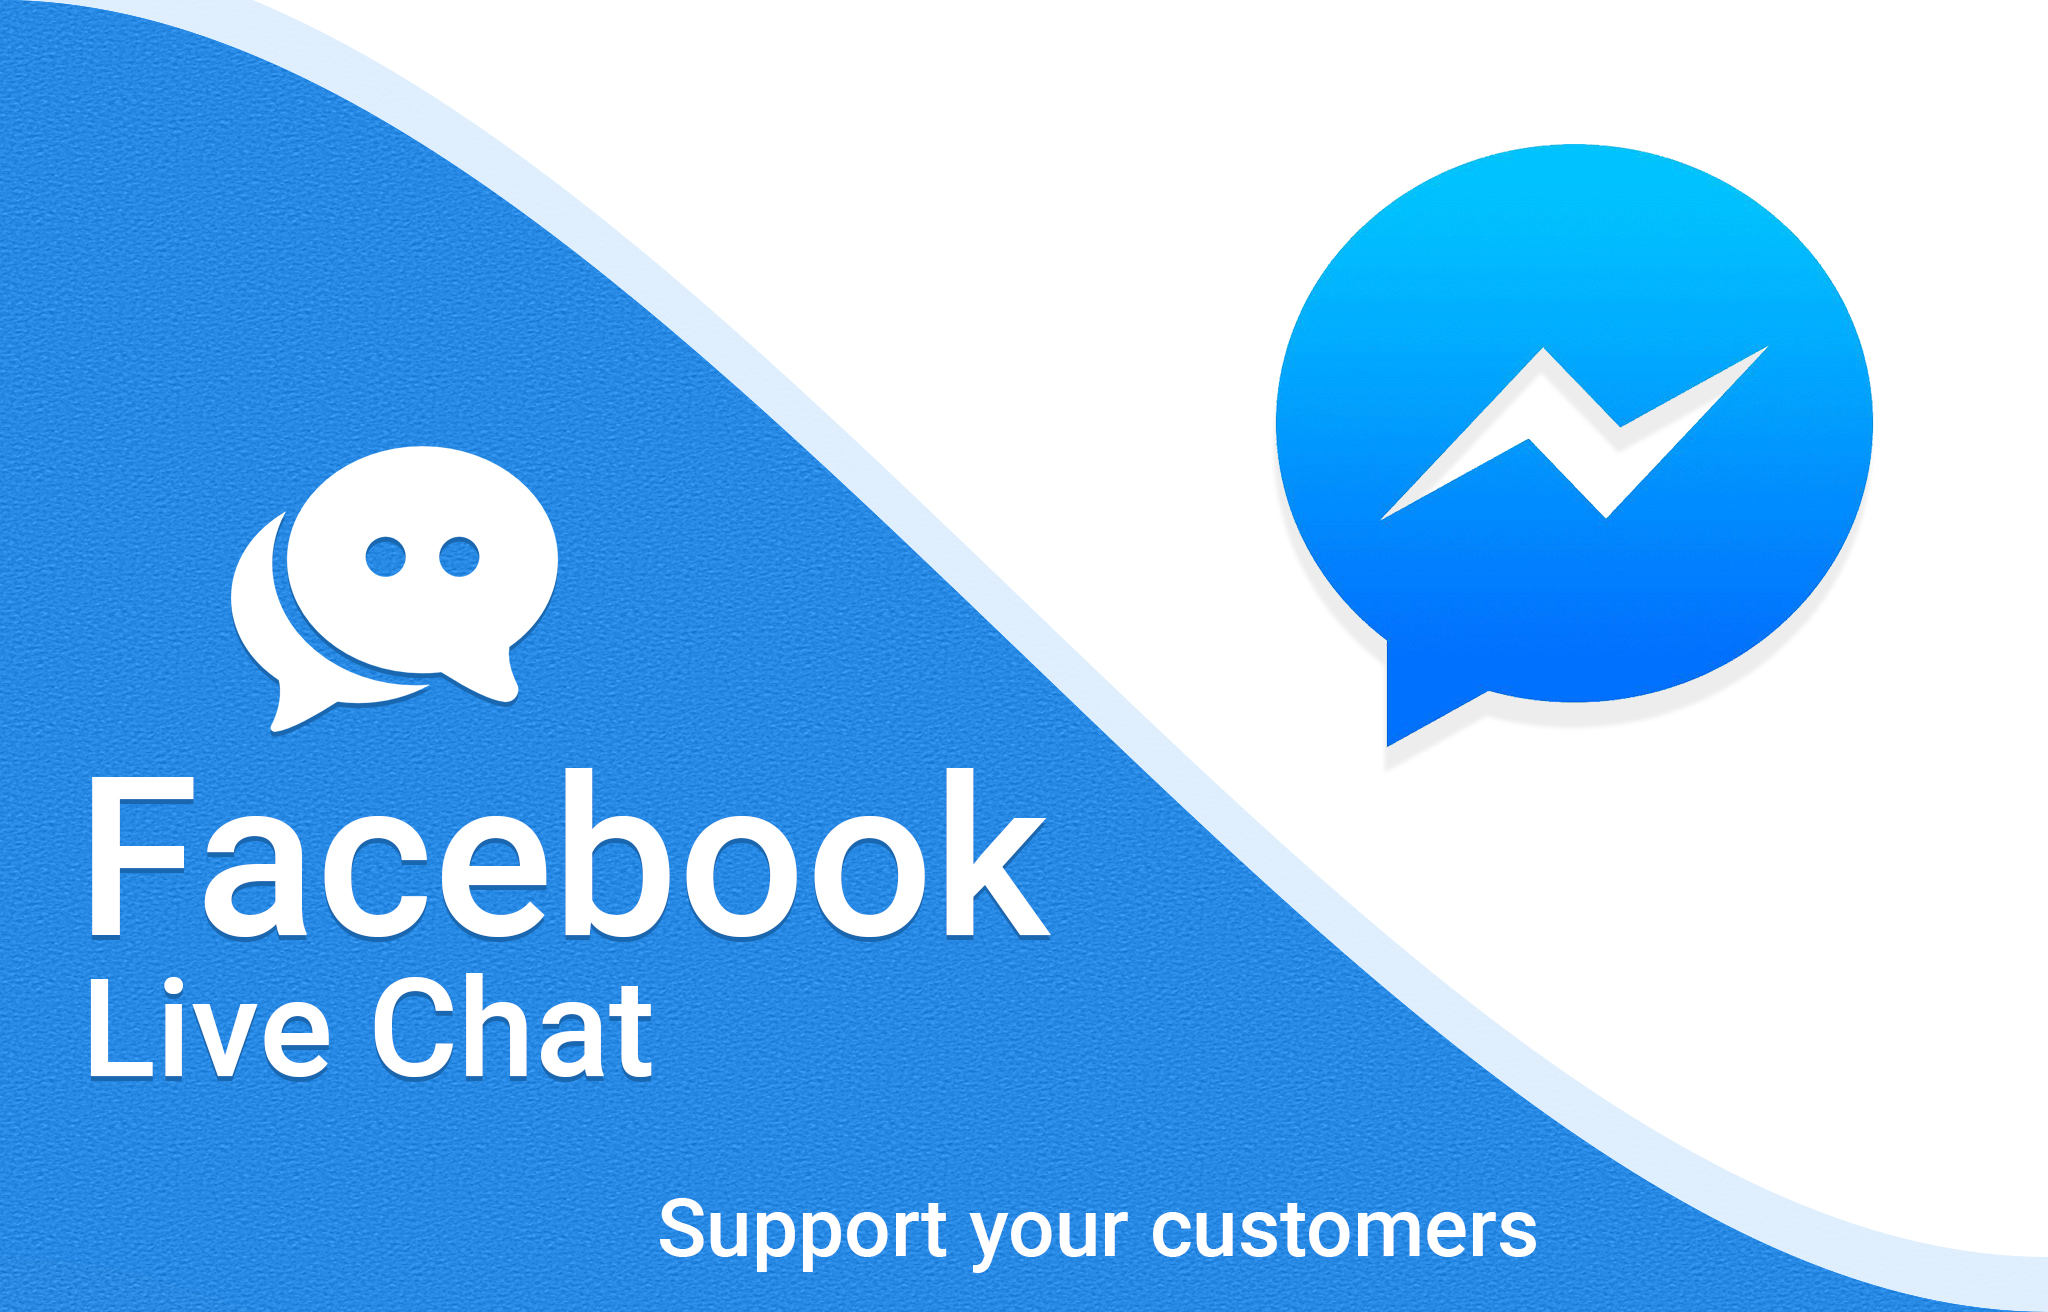 Facebook how to live chat support